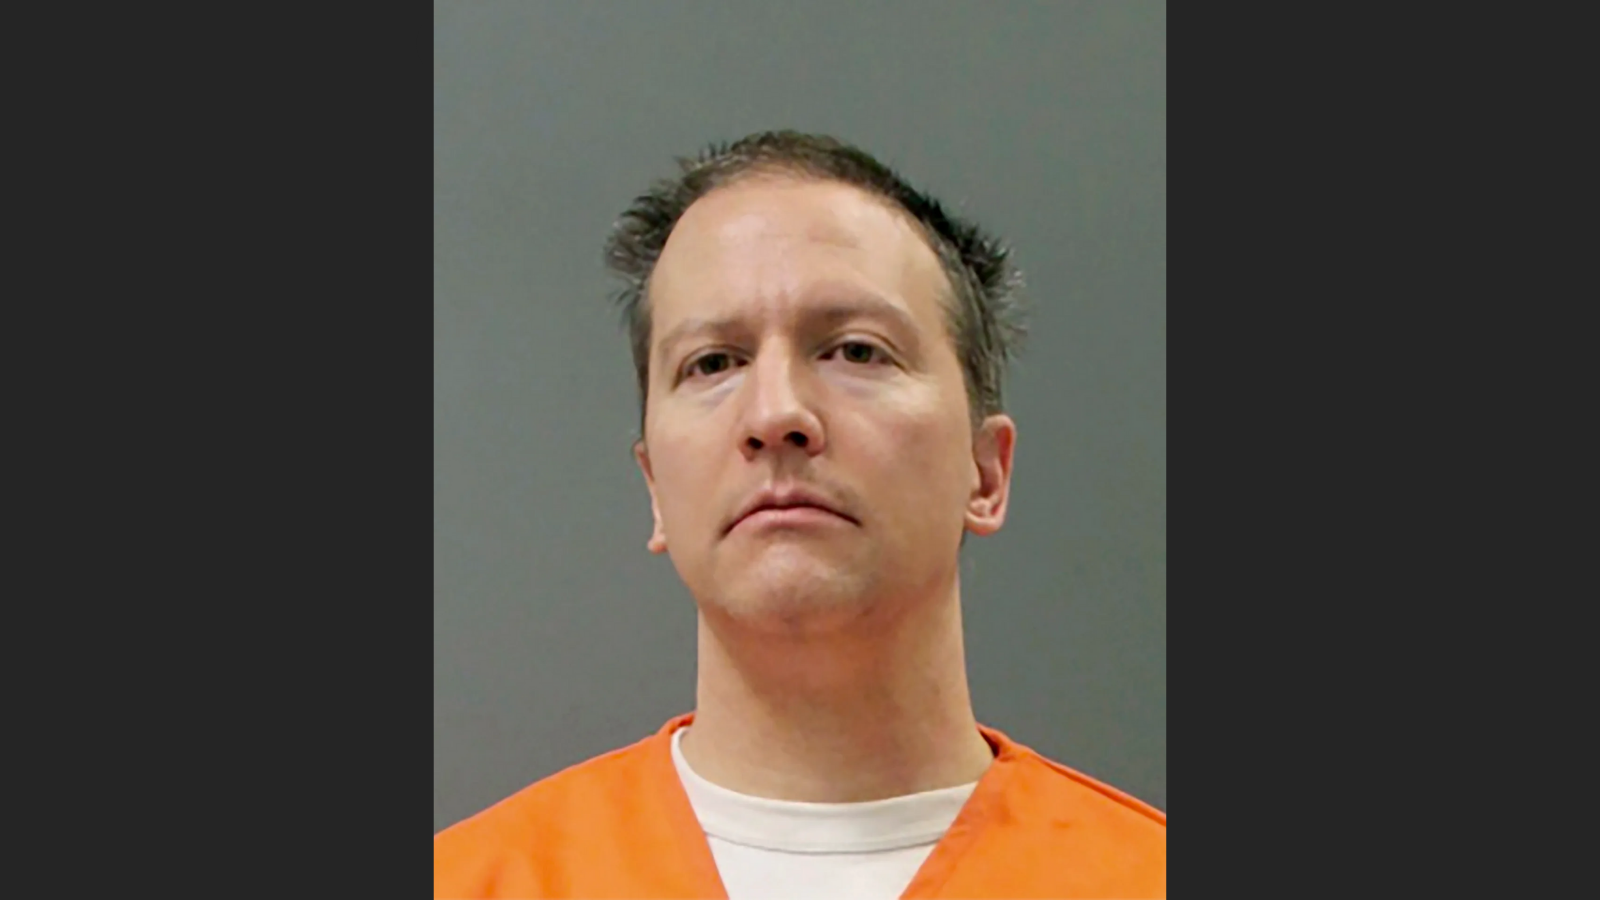 This booking photo provided by the Minnesota Department of Corrections shows Derek Chauvin on Wednesday, April 21, 2021. The former Minneapolis police officer was convicted Tuesday, April 20 of murder and manslaughter in the 2020 death of George Floyd. (Minnesota Department of Corrections via AP)